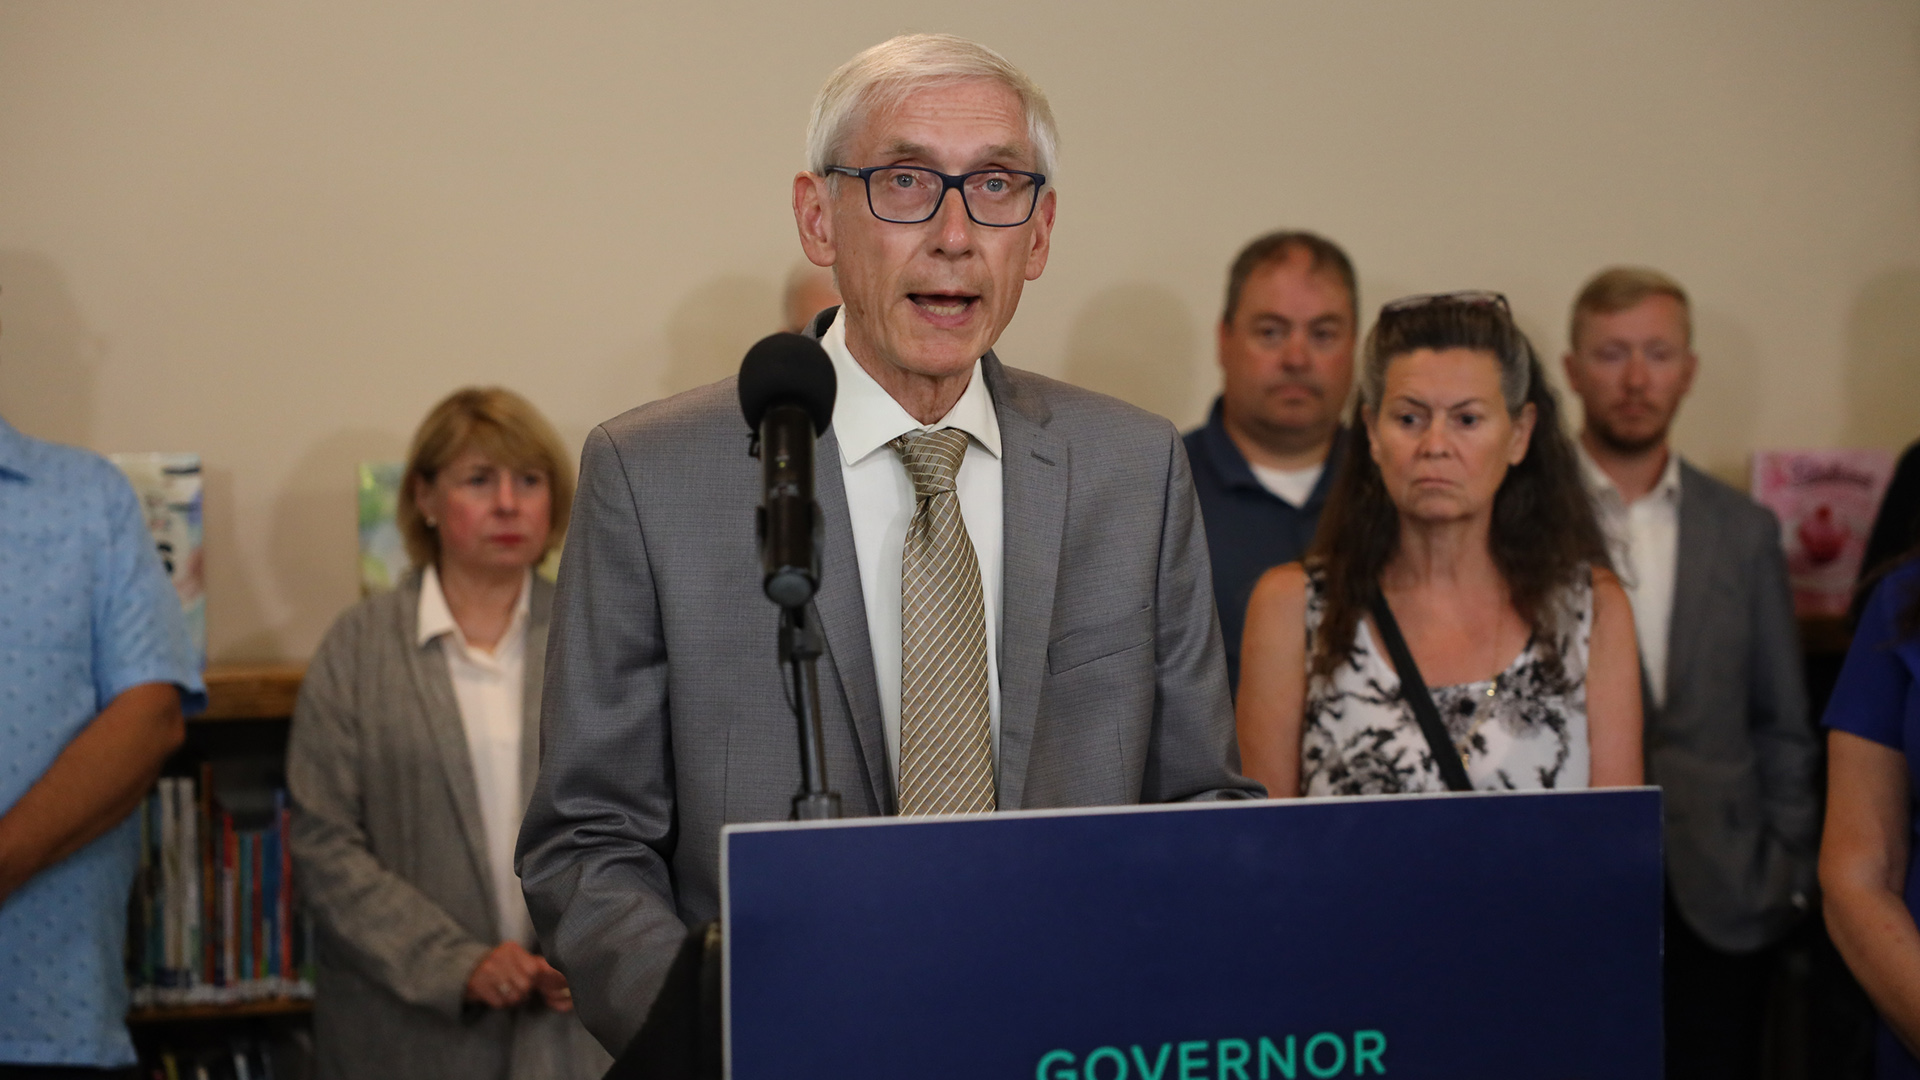 Tony Evers stands in front of a podium with one microphone and speaks with other people standing in the background.